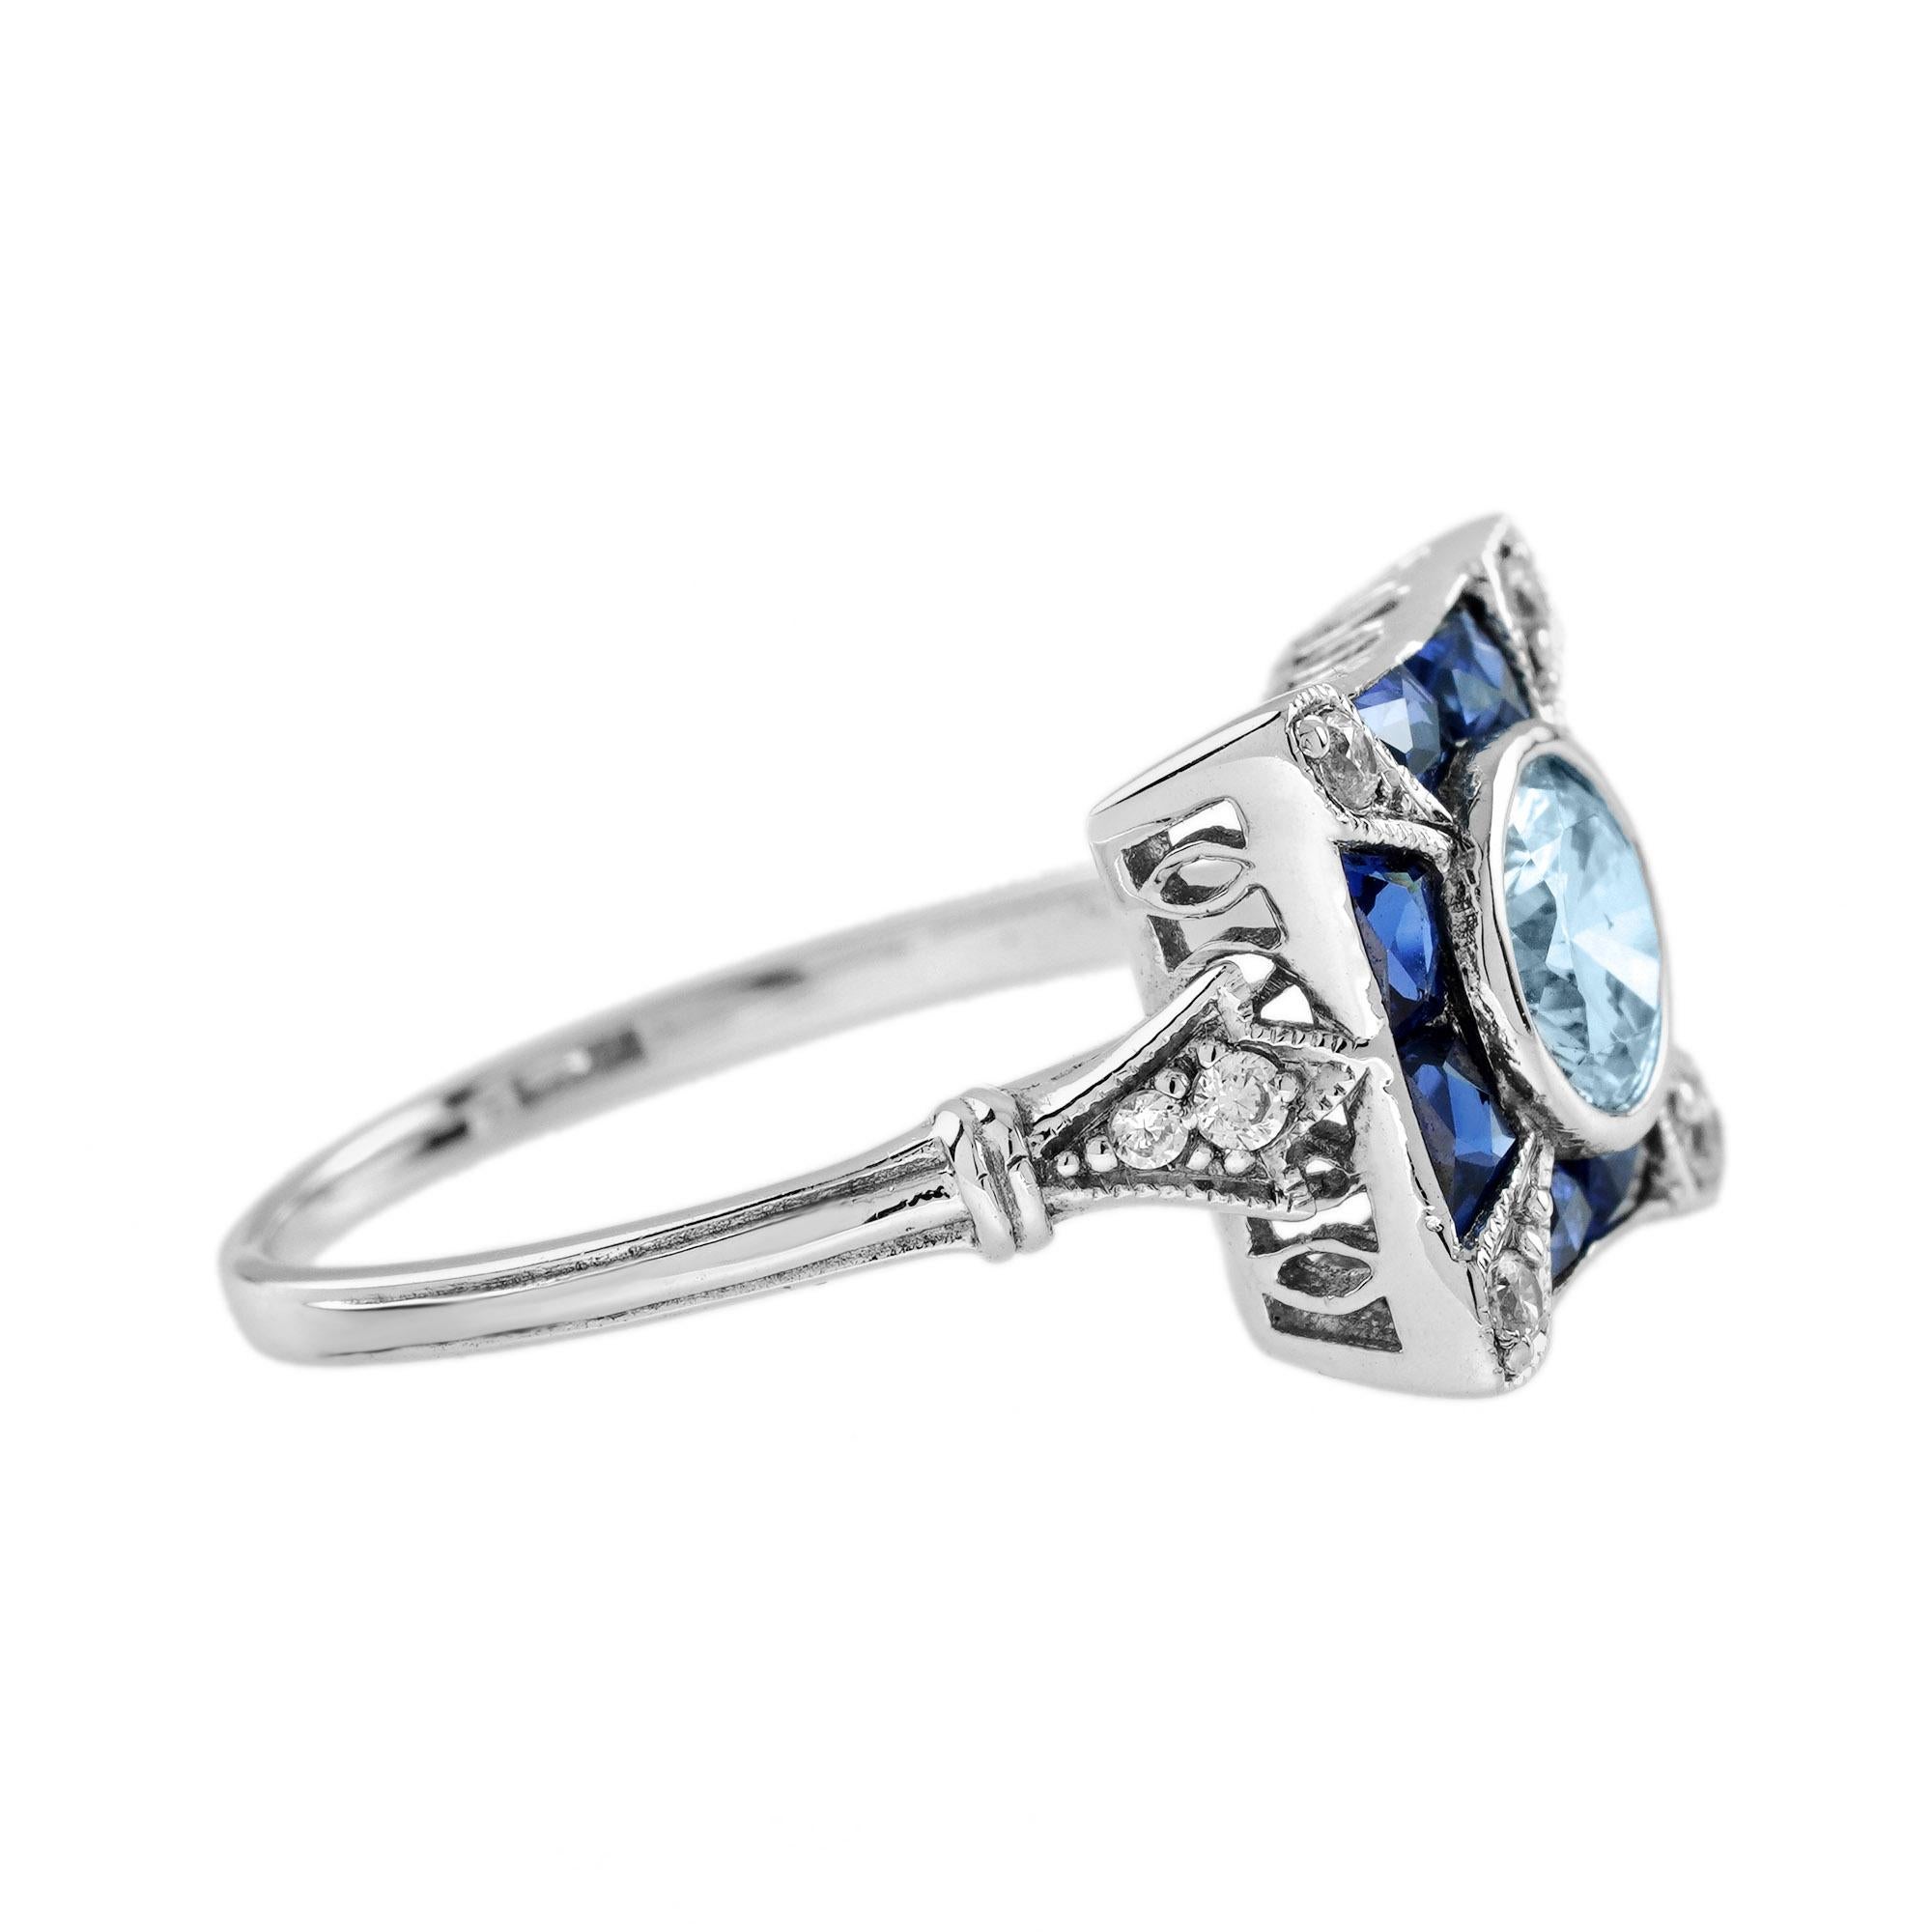 For Sale:  Aquamarine Diamond and Blue Sapphire Art Deco Style Engagement Ring in 18K Gold 4